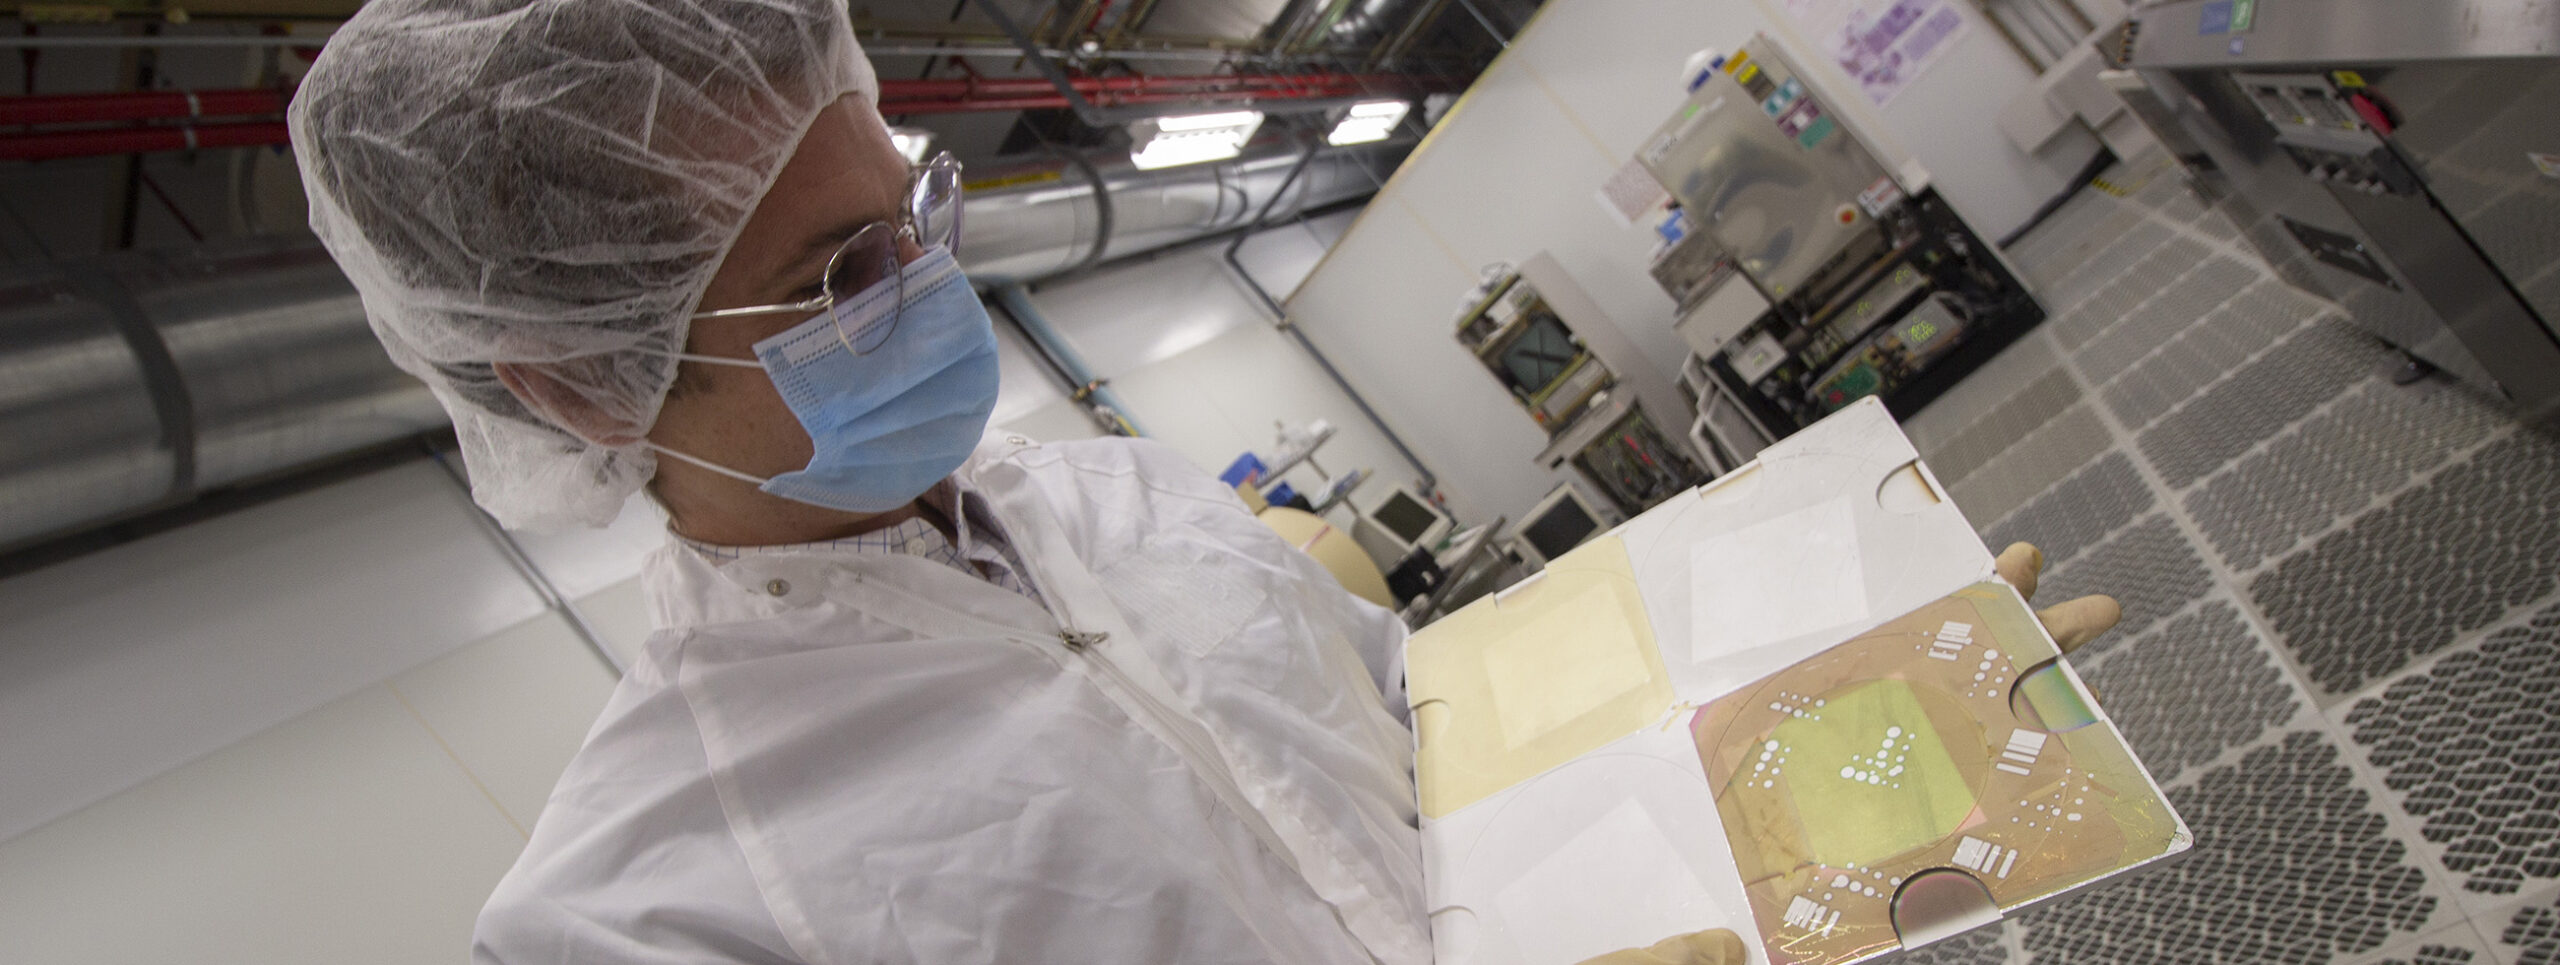 A faculty member examines a photovoltaic device in a cleanroom.